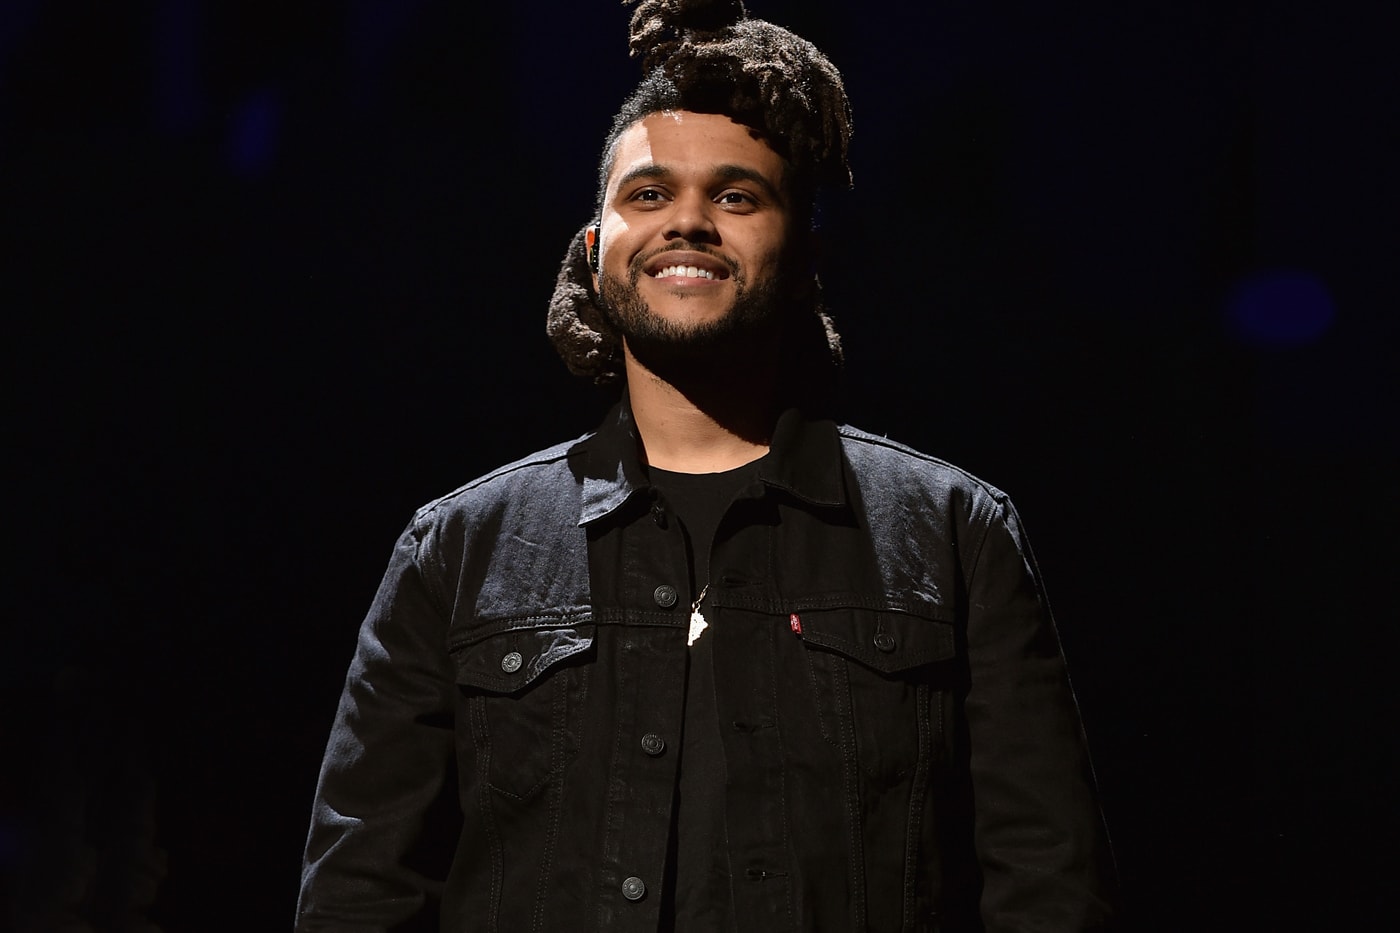 The Weeknd Speaks on Michael Jackson and New Music